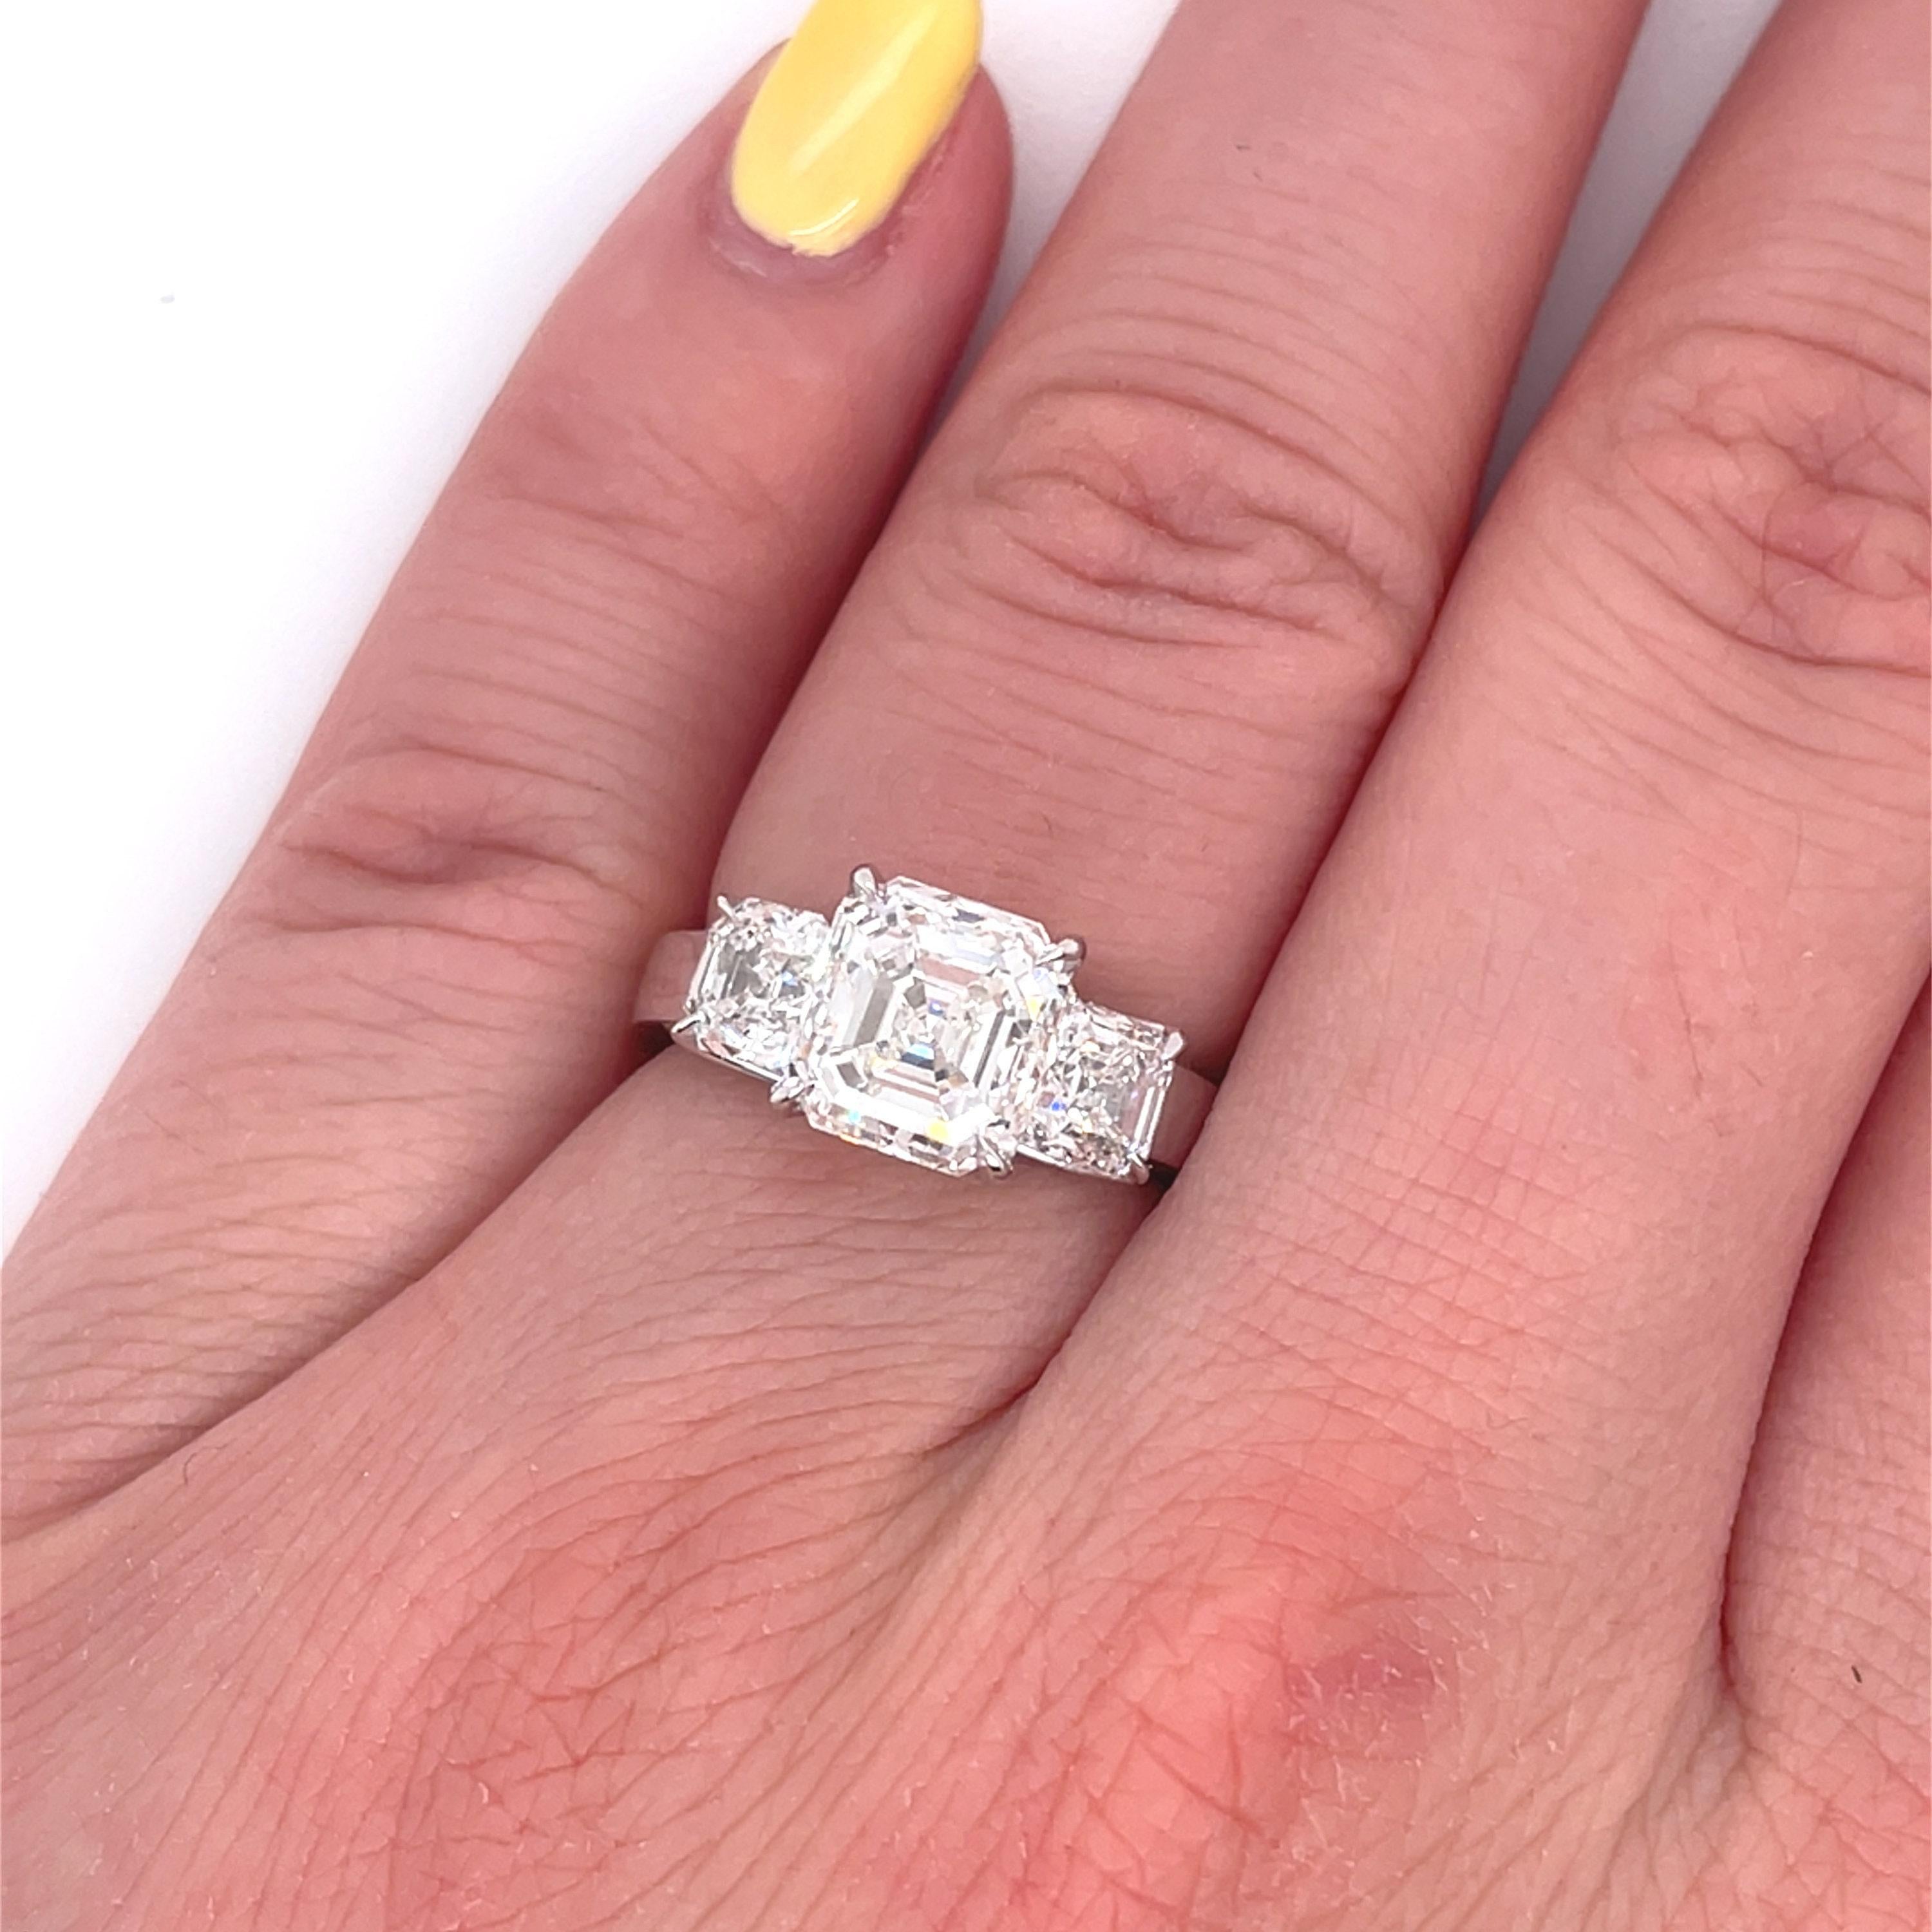 GIA Certified 4.46 Carat Natural Diamond Three Stone Engagement Ring in Platinum

********E-Copy of the GIA Certificate is Available Upon Request.**********

A stunning ring featuring IGI/GIA Certified 3.01 Carat Natural Diamond and 1.45 Carats of